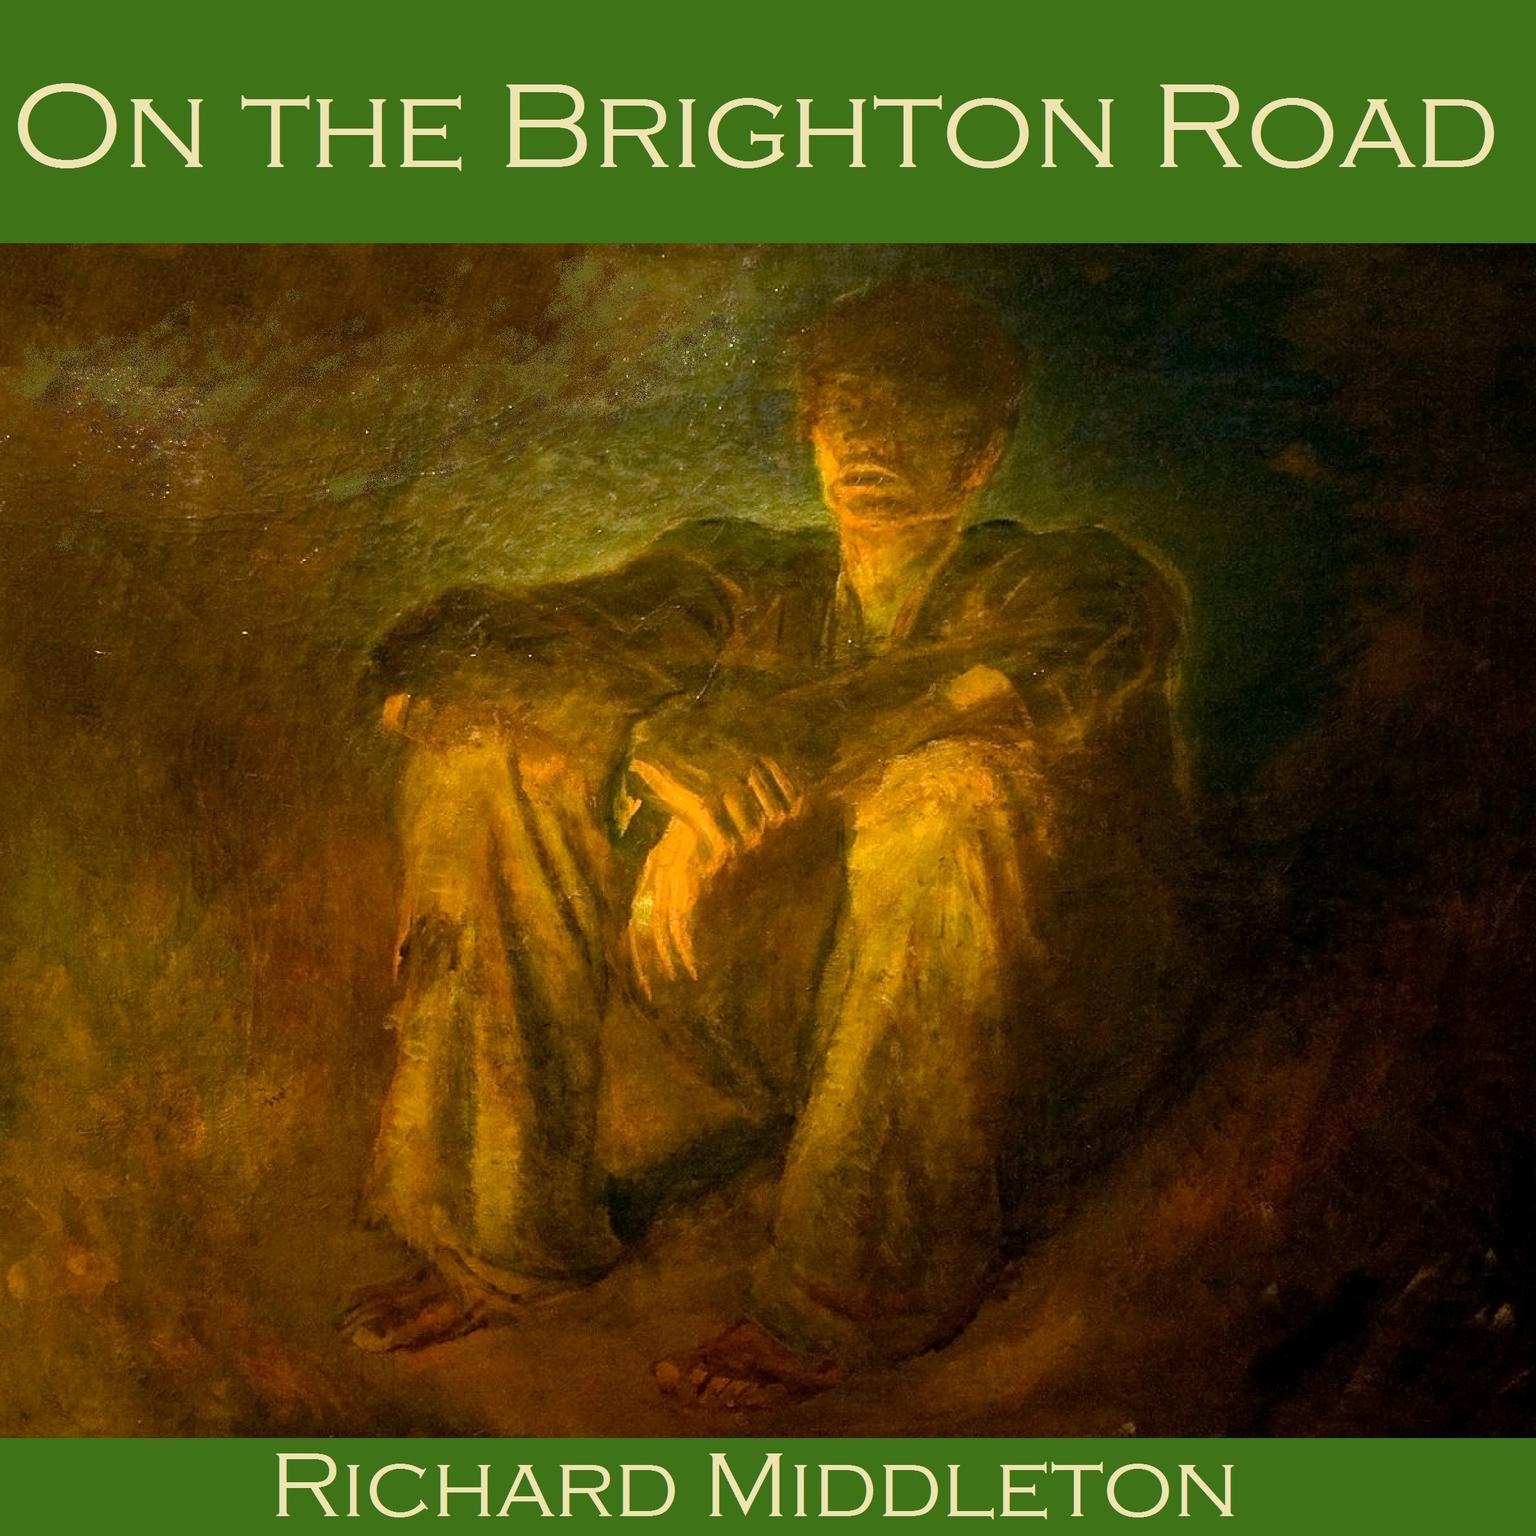 On the Brighton Road Audiobook, by Richard Middleton